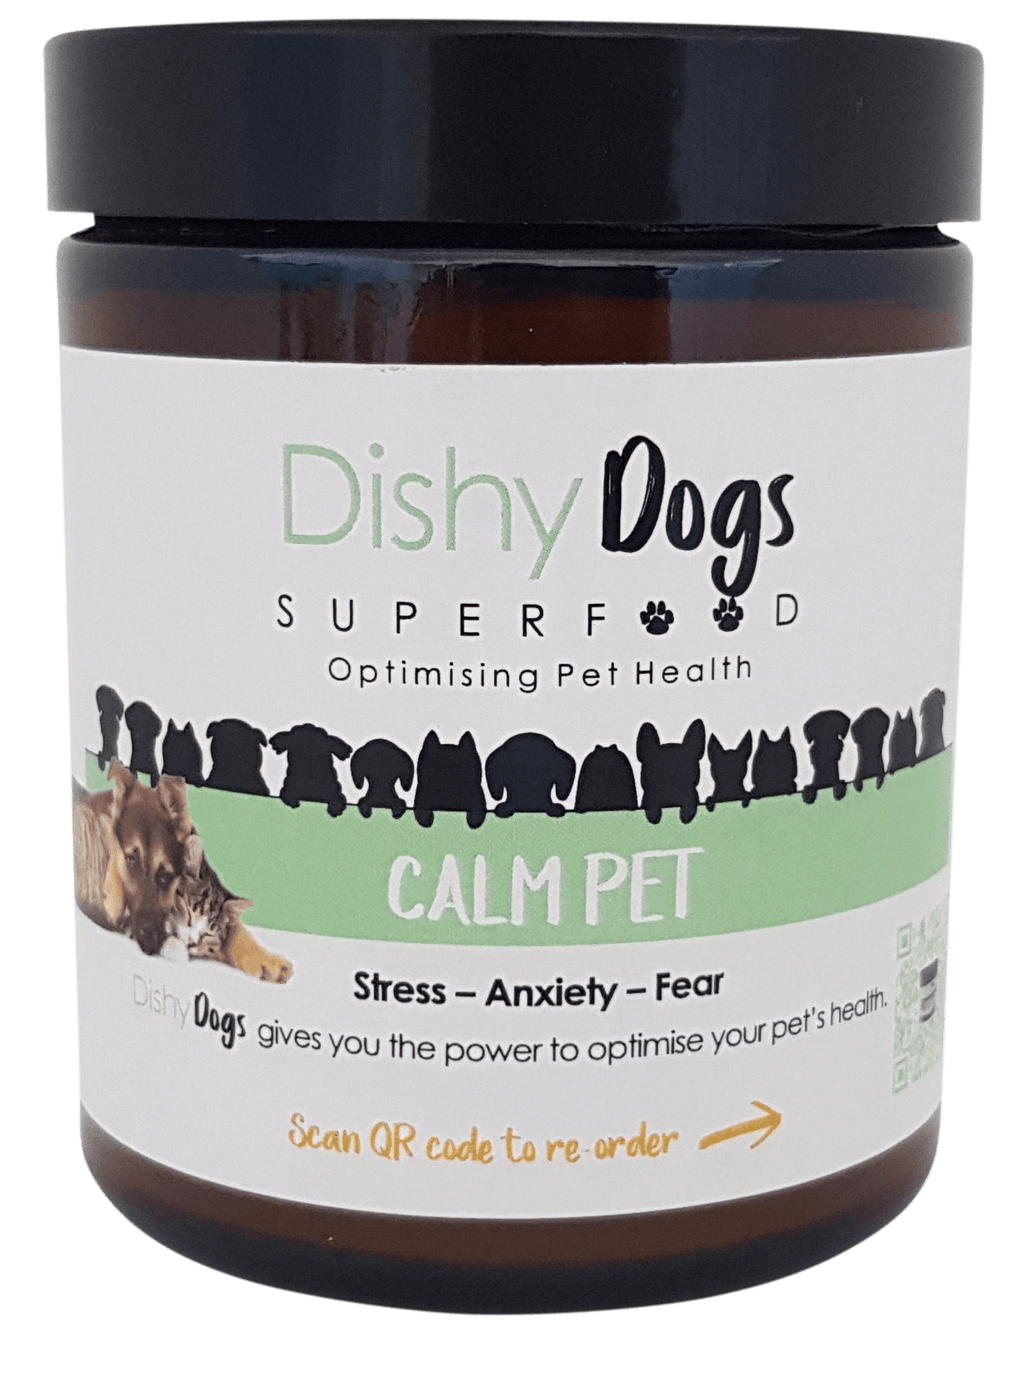 Calm Pet, Anxiety Supplement for Dogs, Stress Supplement for dogs, Reduce fear in dogs, calming supplement for dogs